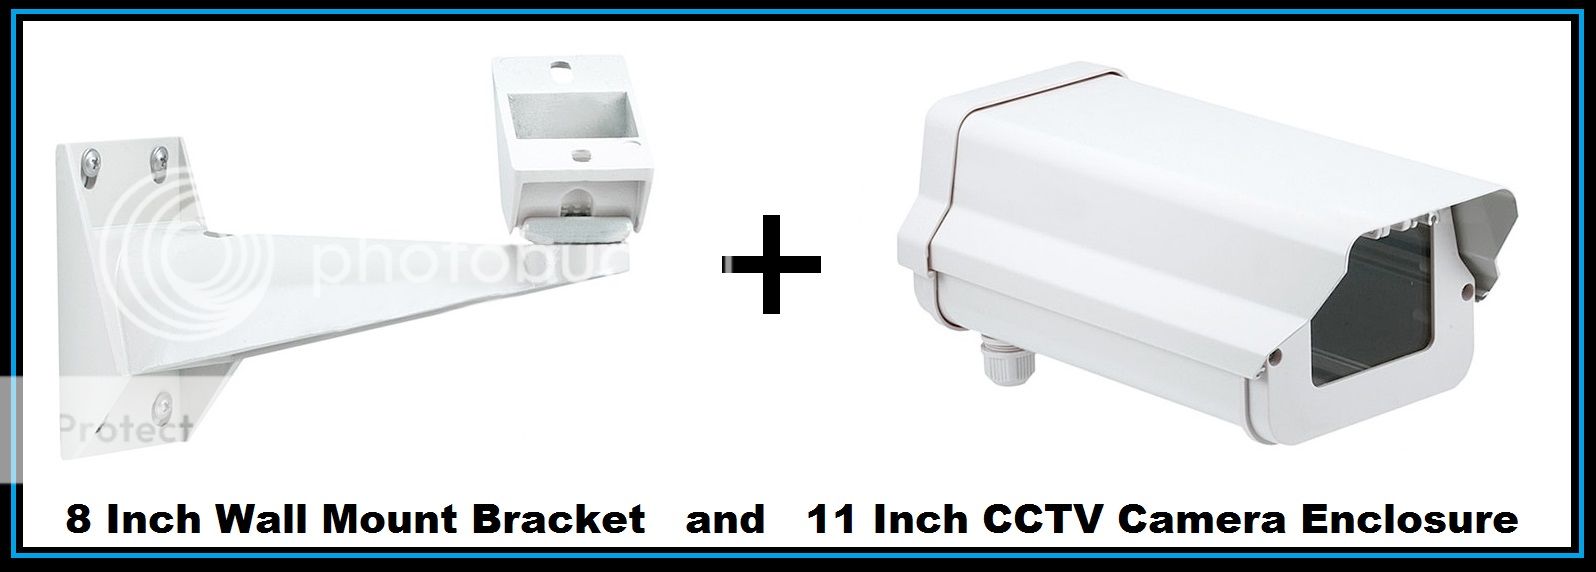 6pack 11inch CCTV Security Camera Outdoor Indoor Cover Housing 8"Wall Mount Arm